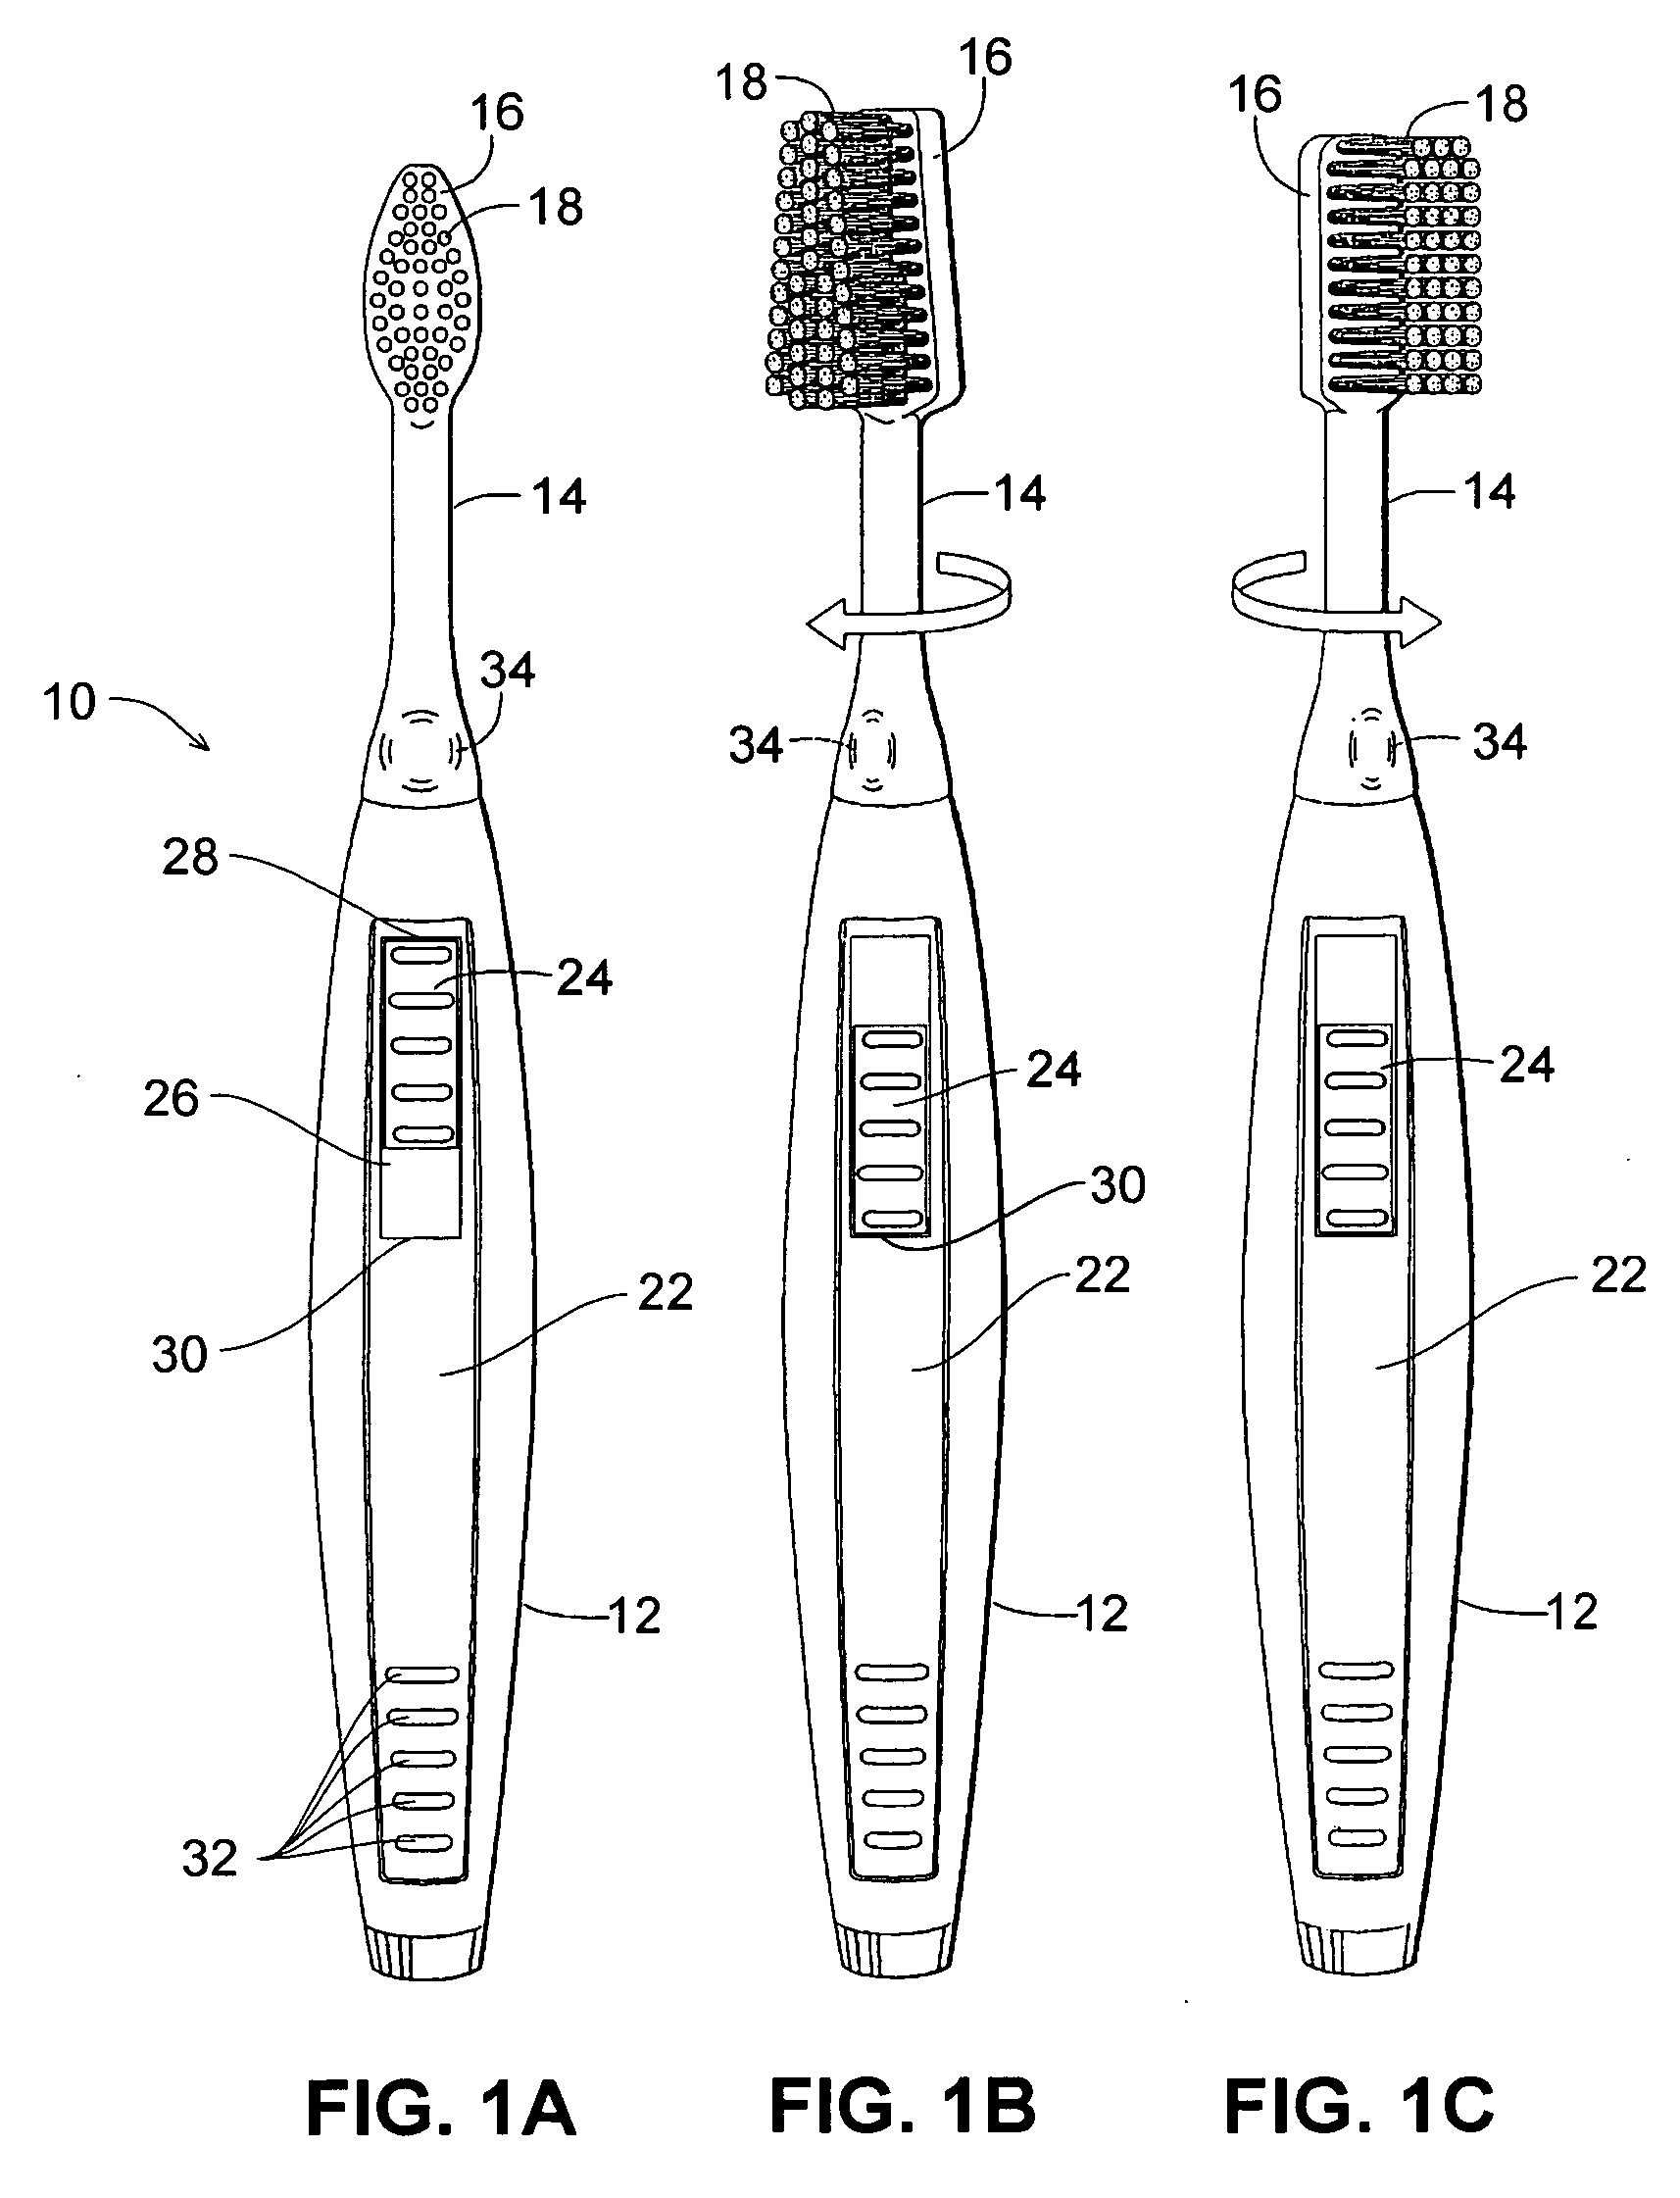 Electric toothbrush for implementing the bass brushing technique